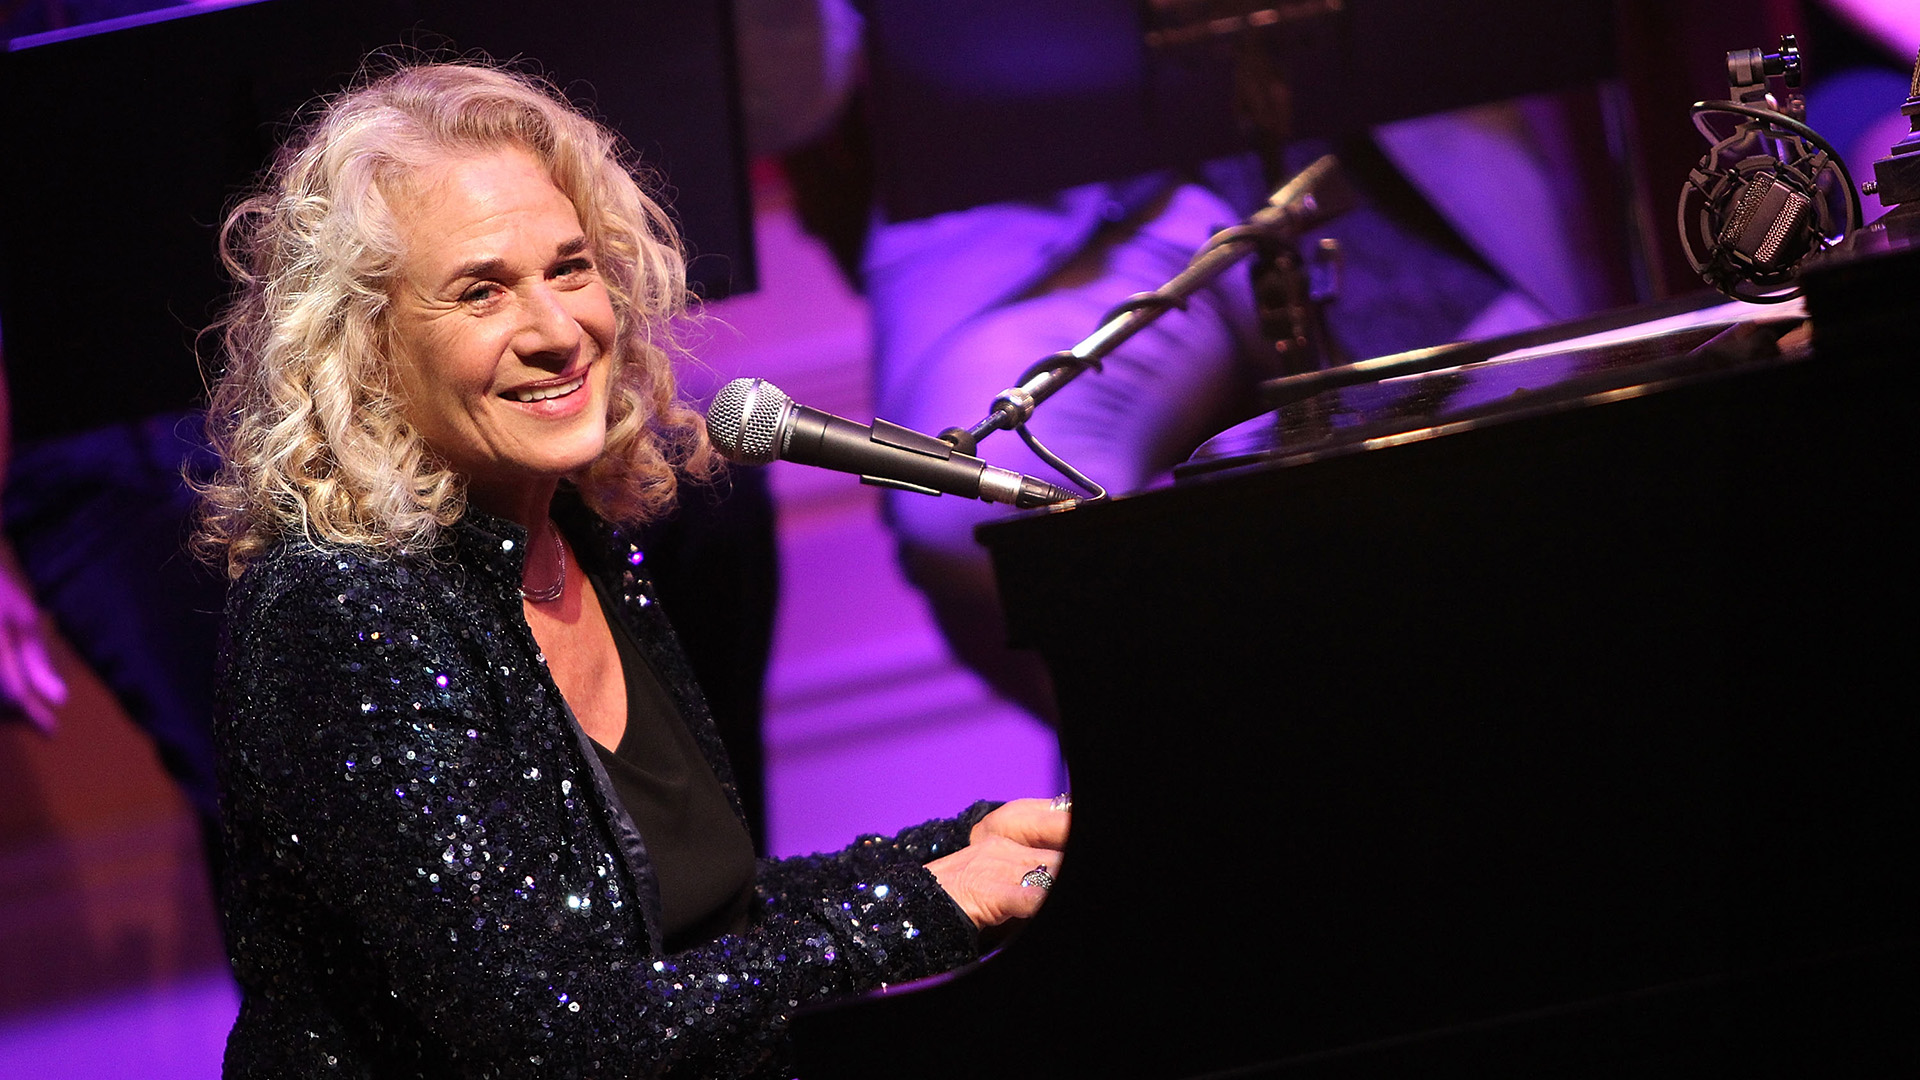 Honoree Carole King performs at the 2013 Library Of Congress Gershwin Prize Tribute Concert at the Thomas Jefferson Building on May 21, 2013 in Washington, DC.